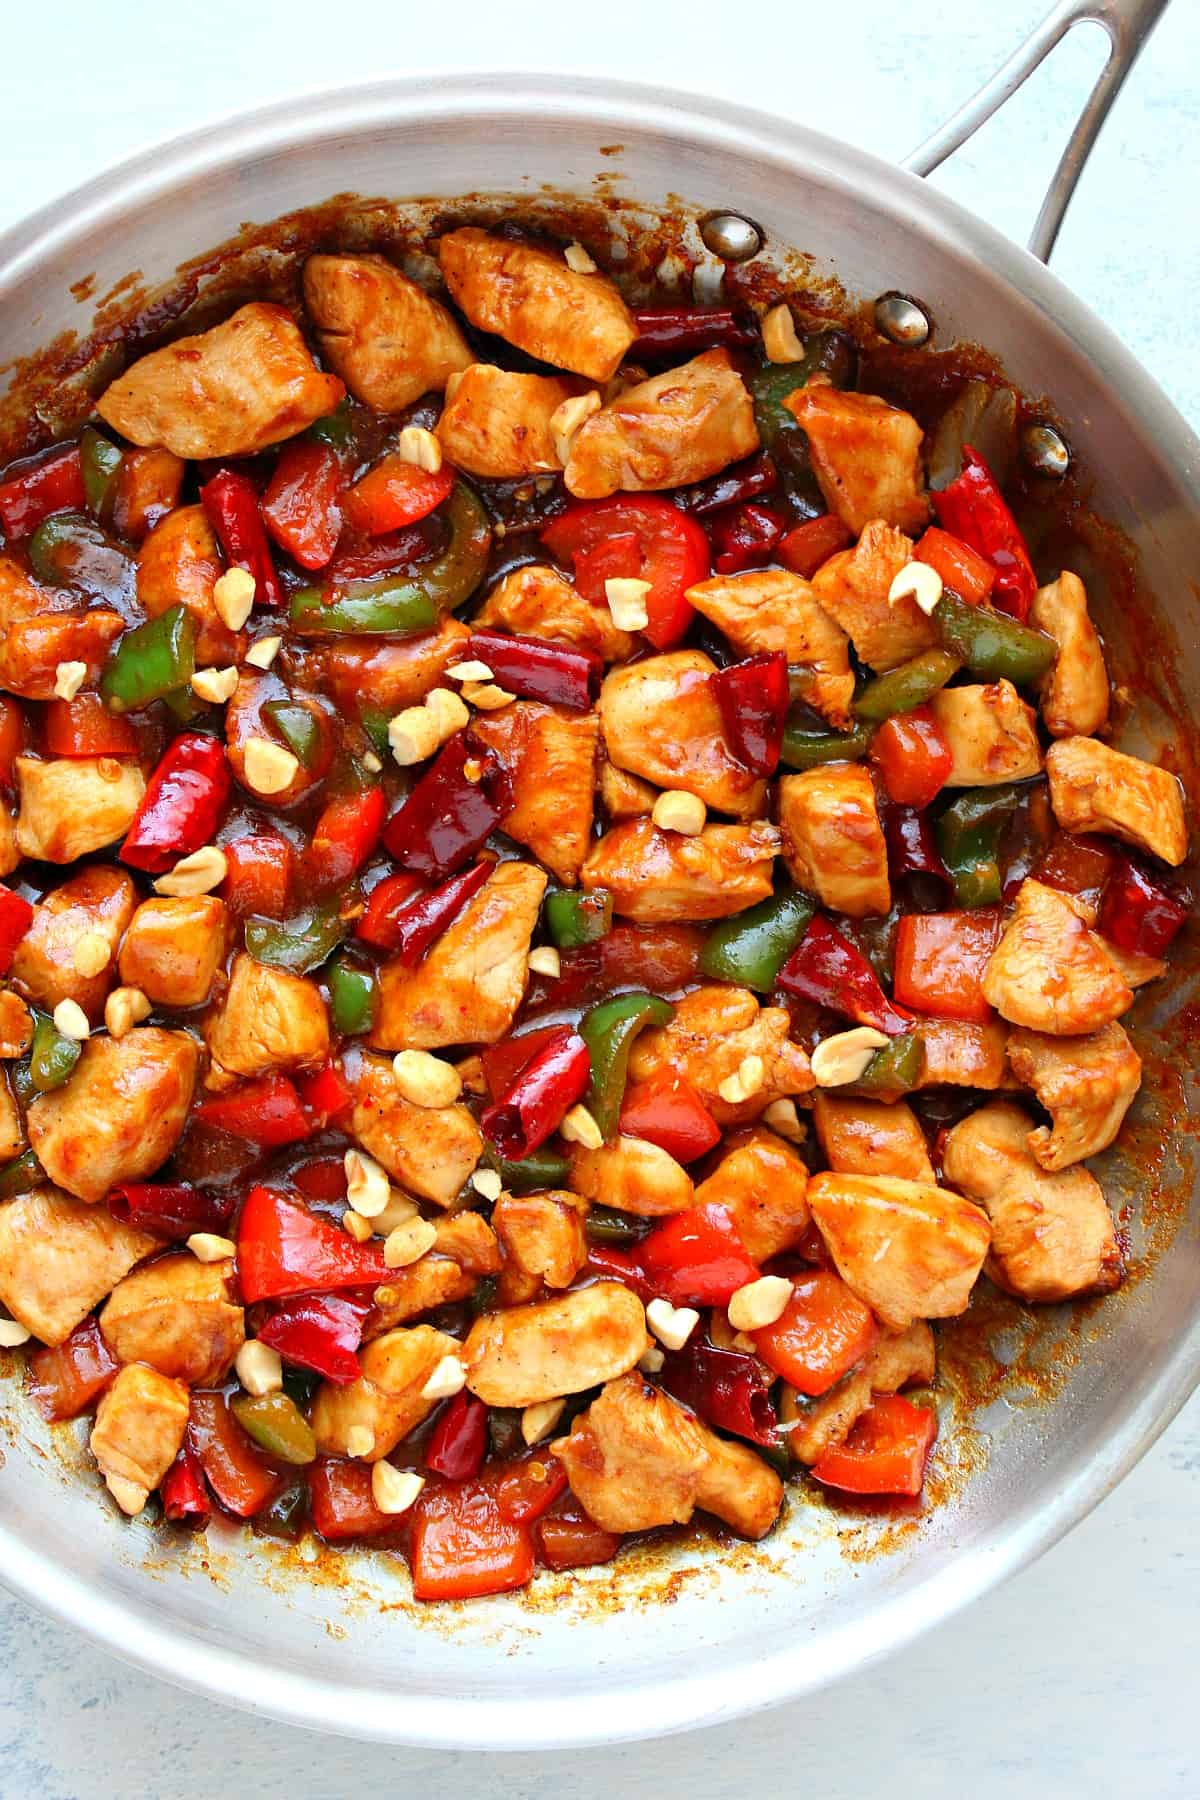 Chicken and peppers in a pan.